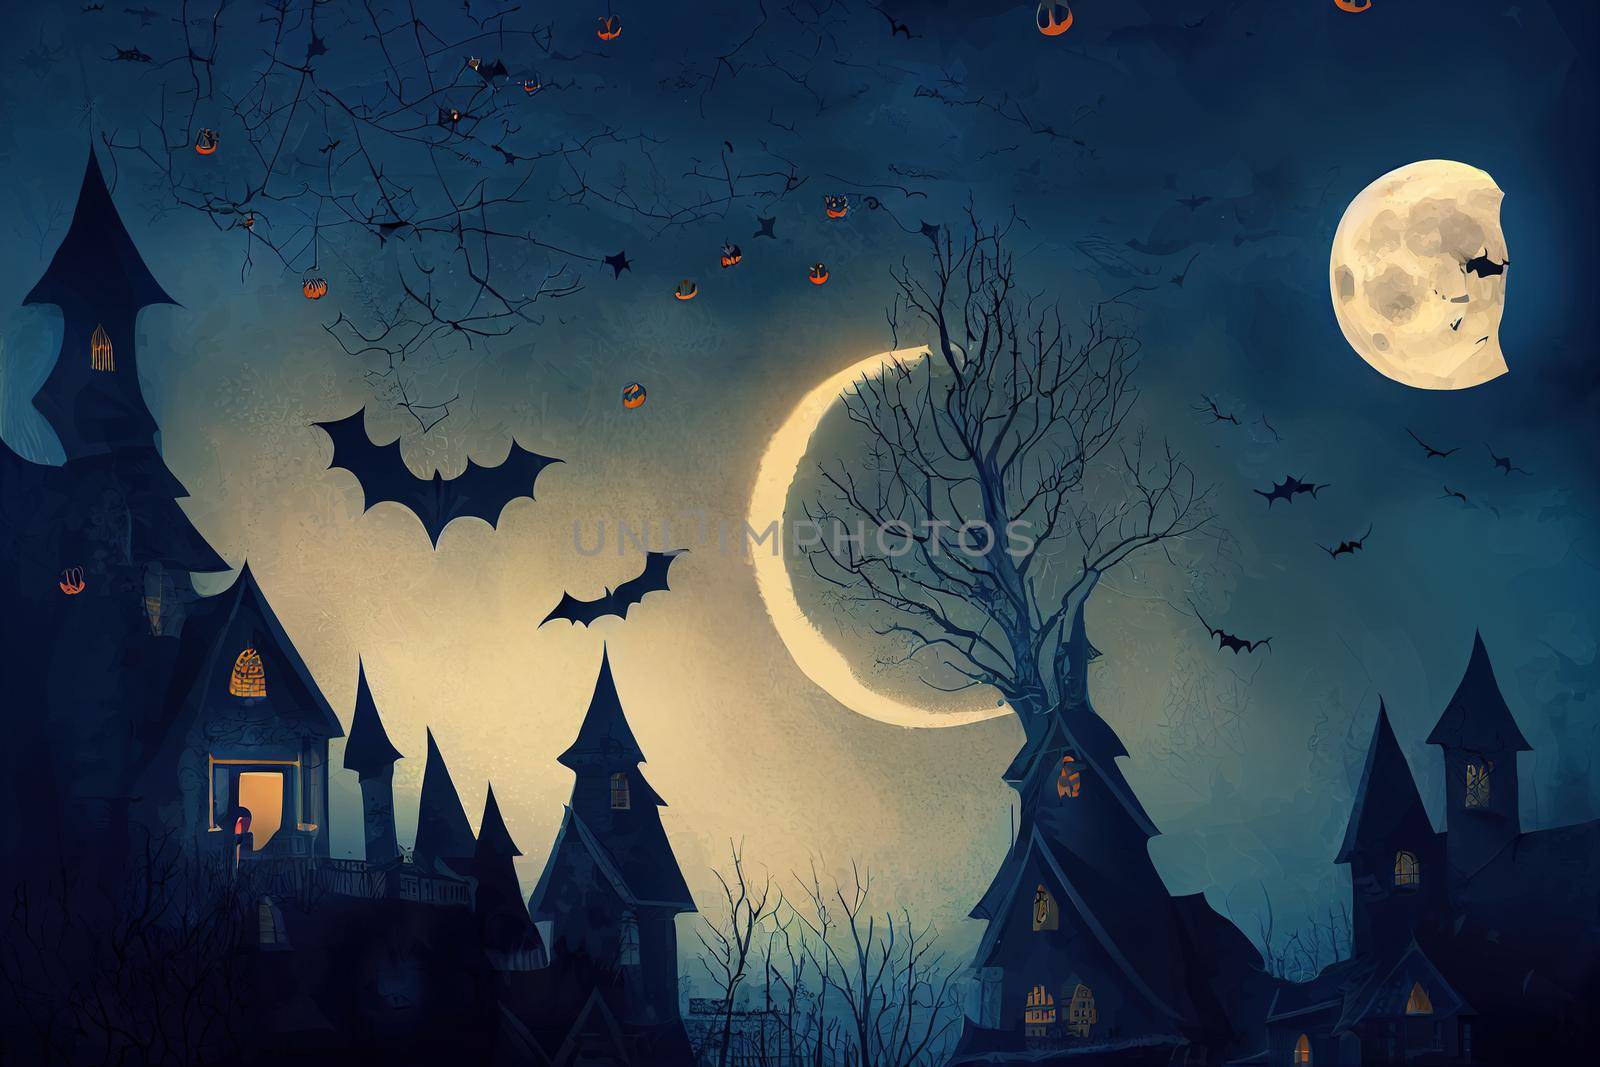 Dark Halloween background with Moon on blue sky, spiders and bats, illustration, 2d style, illustration, design v3